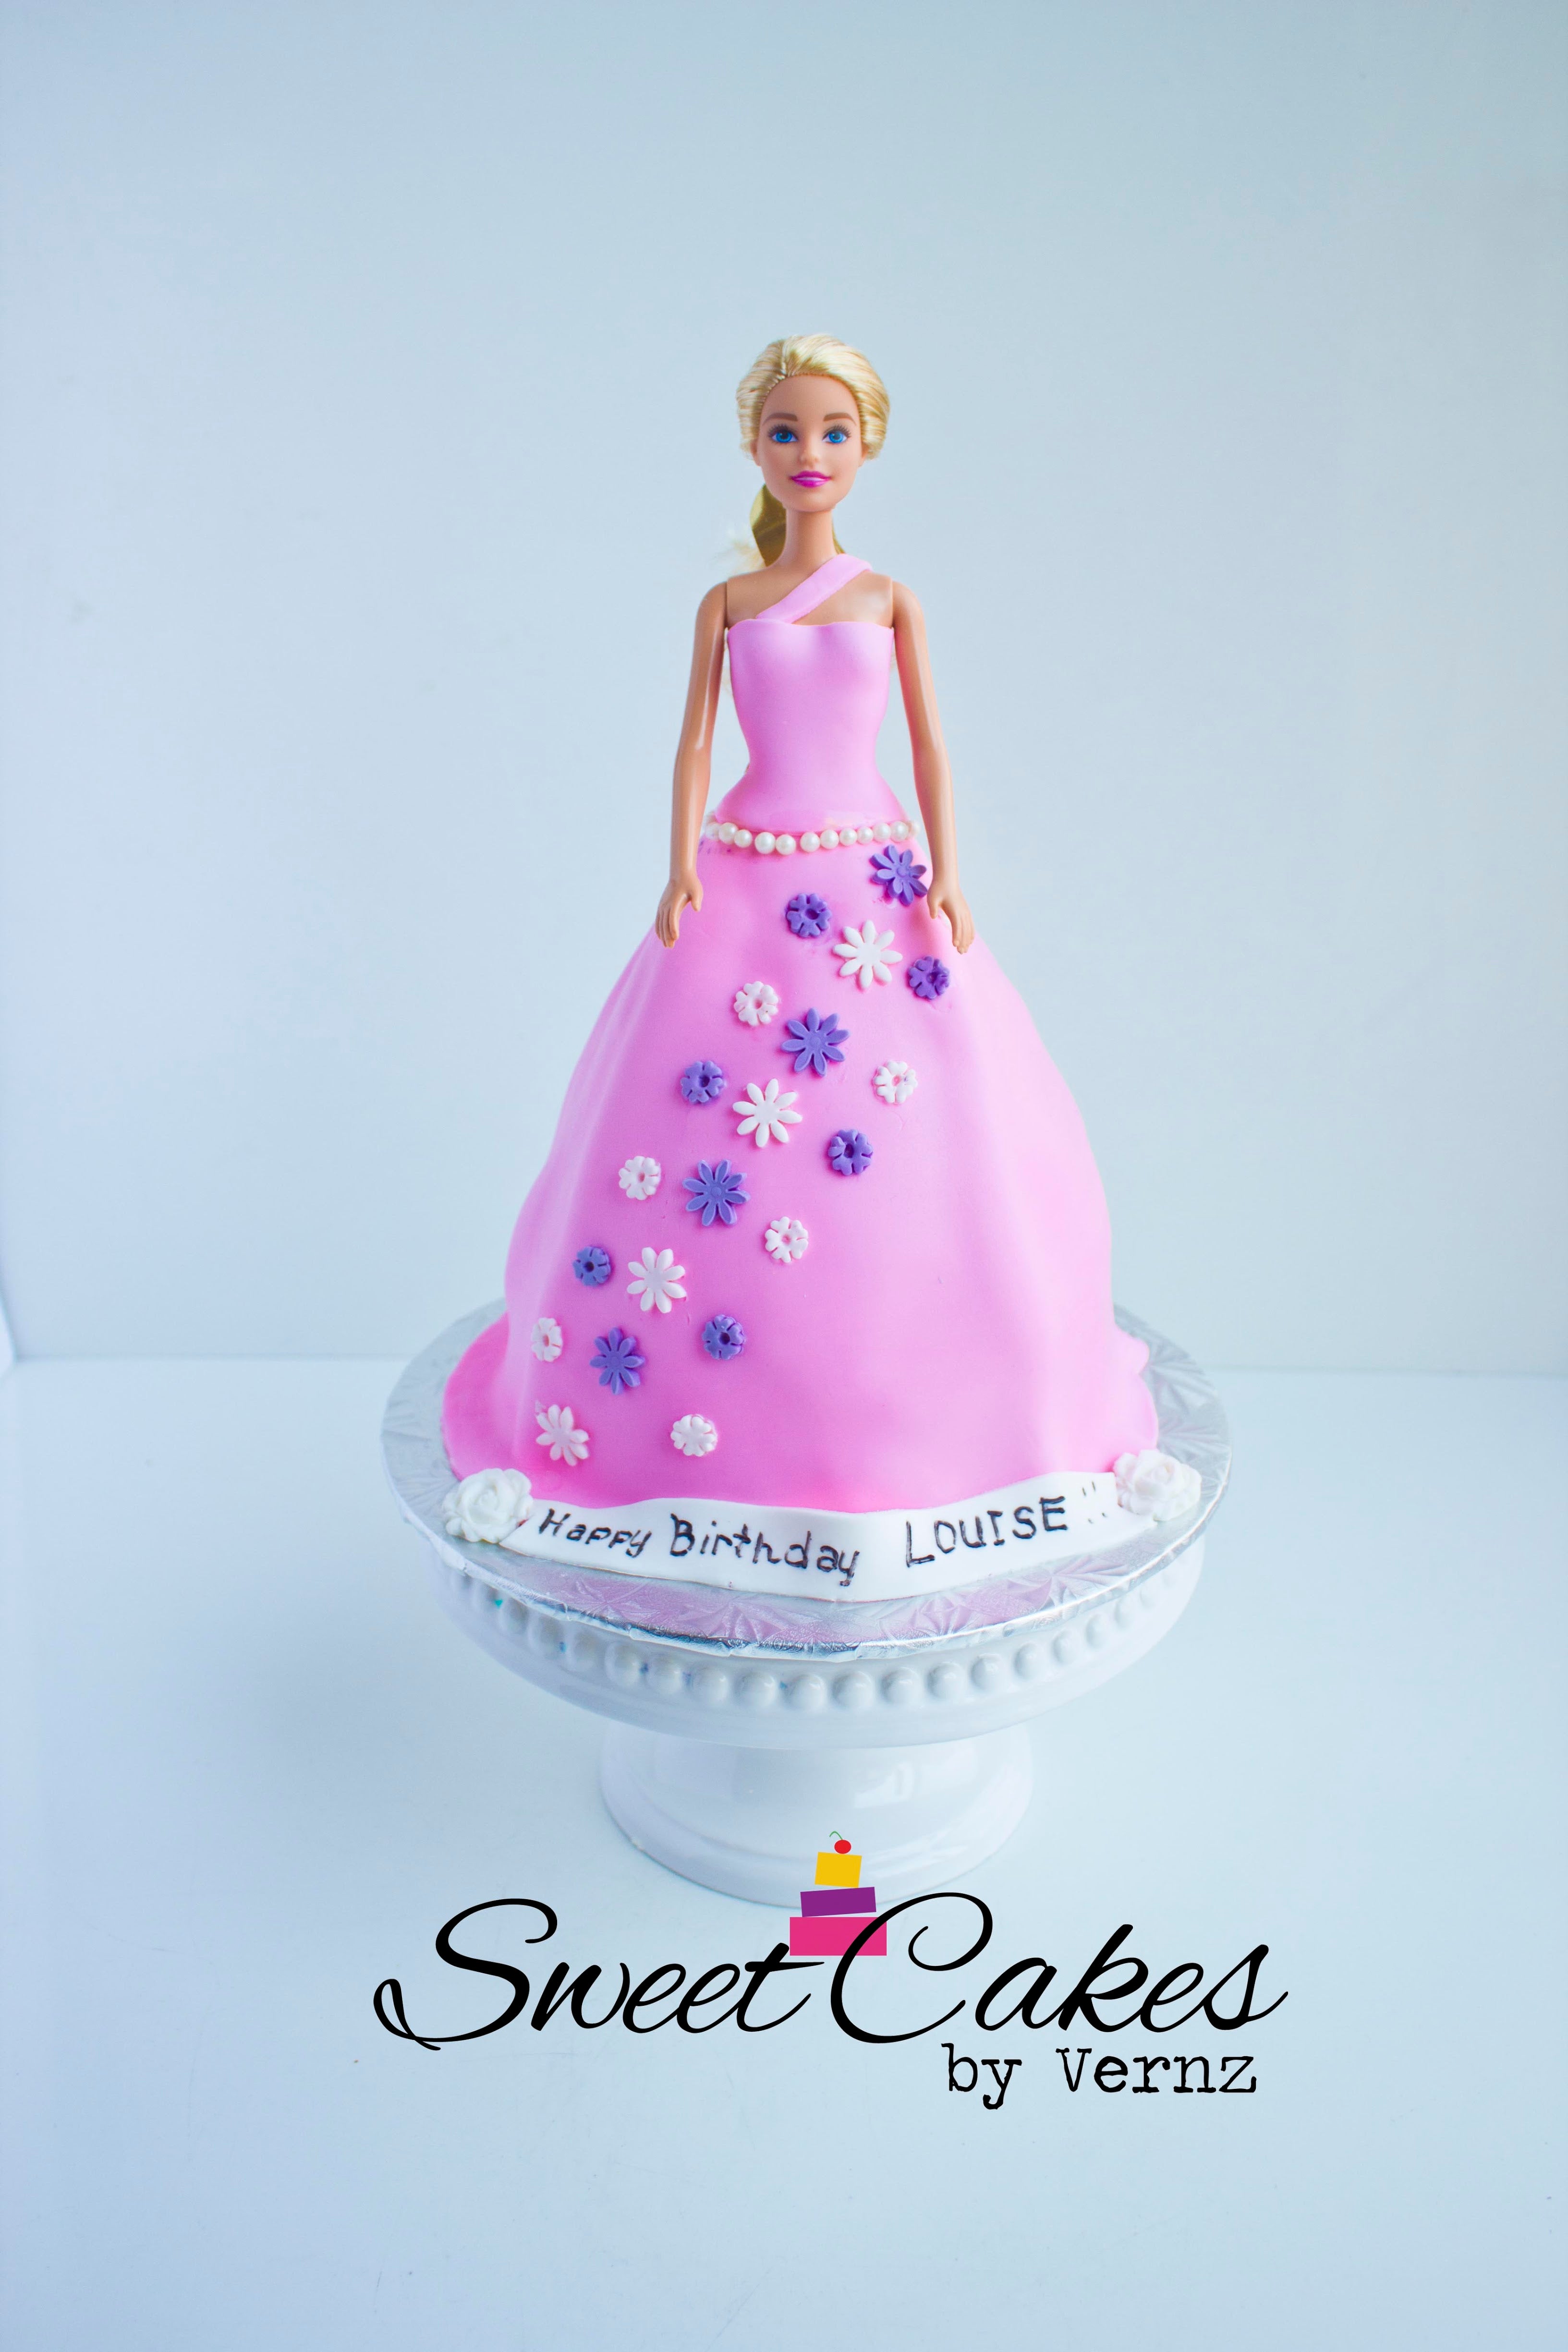 This is an amazing birthday cake that we have in our special cakes collection. Our cakes are locally made in Calgary. If your daughter is looking for a themed Barbie Doll cake, this is it! Order today!